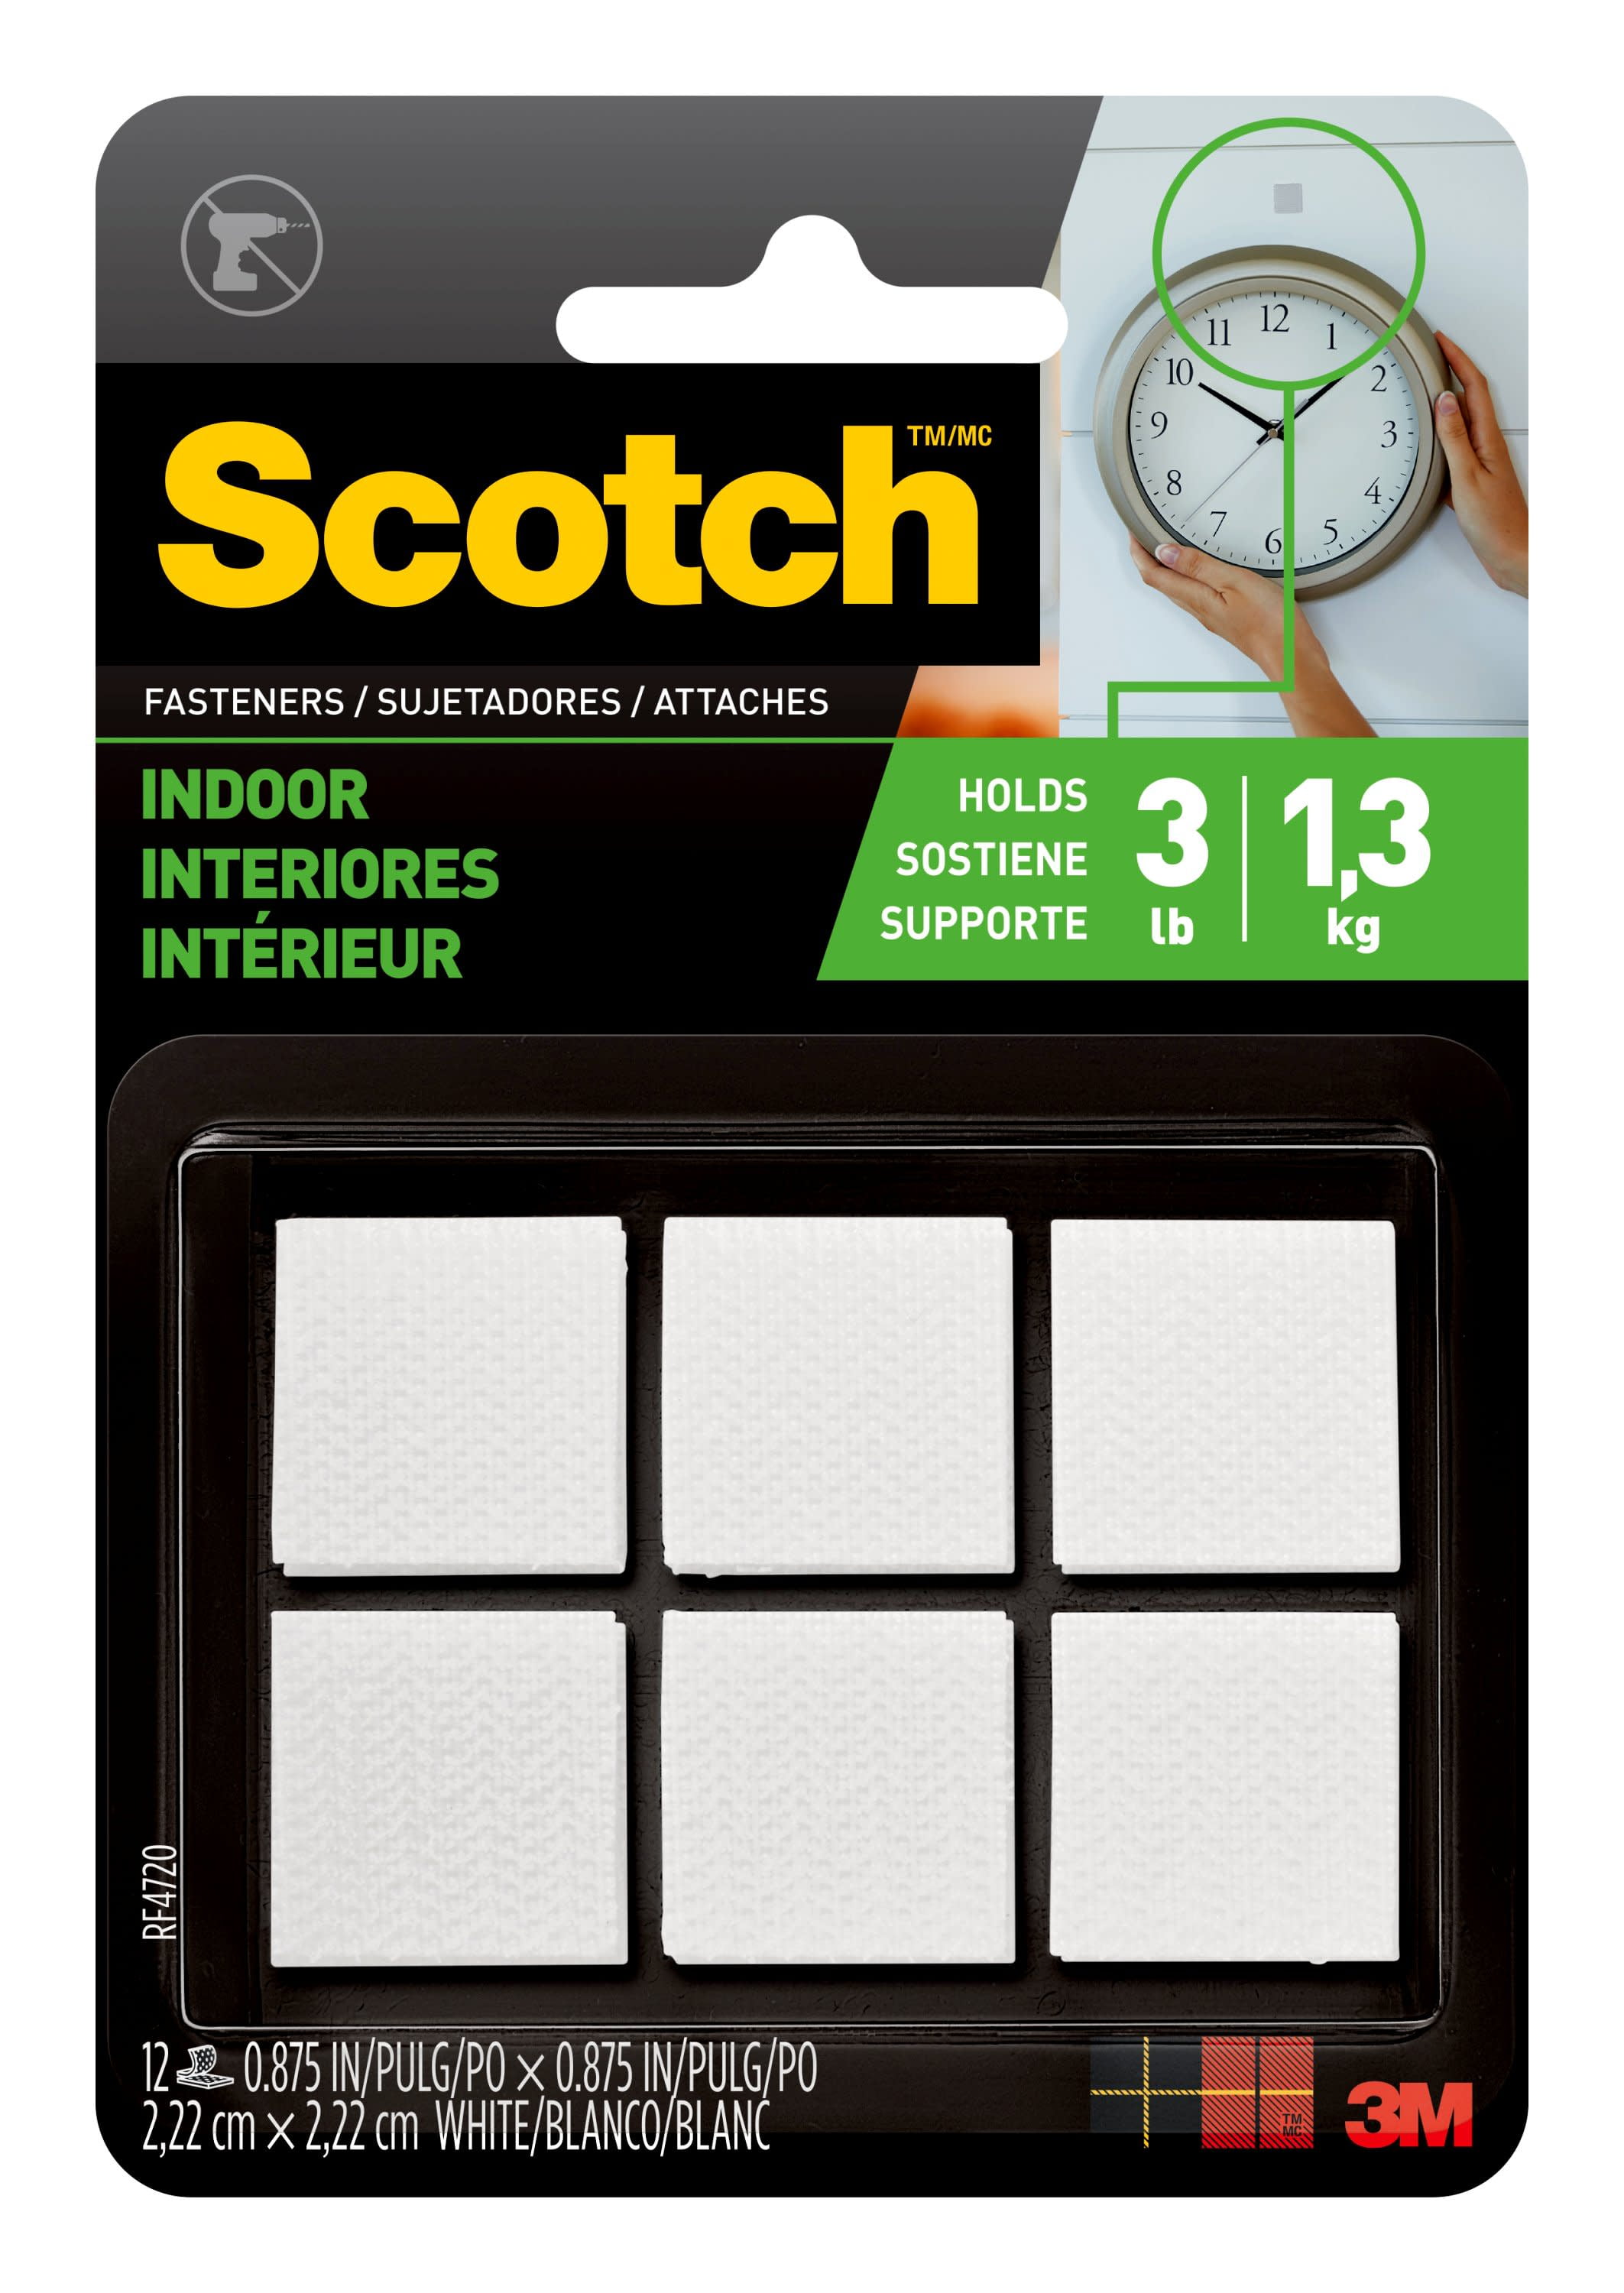 Scotch Indoor Fasteners, 7/8 x 7/8 in, White, 12 Sets of Squares